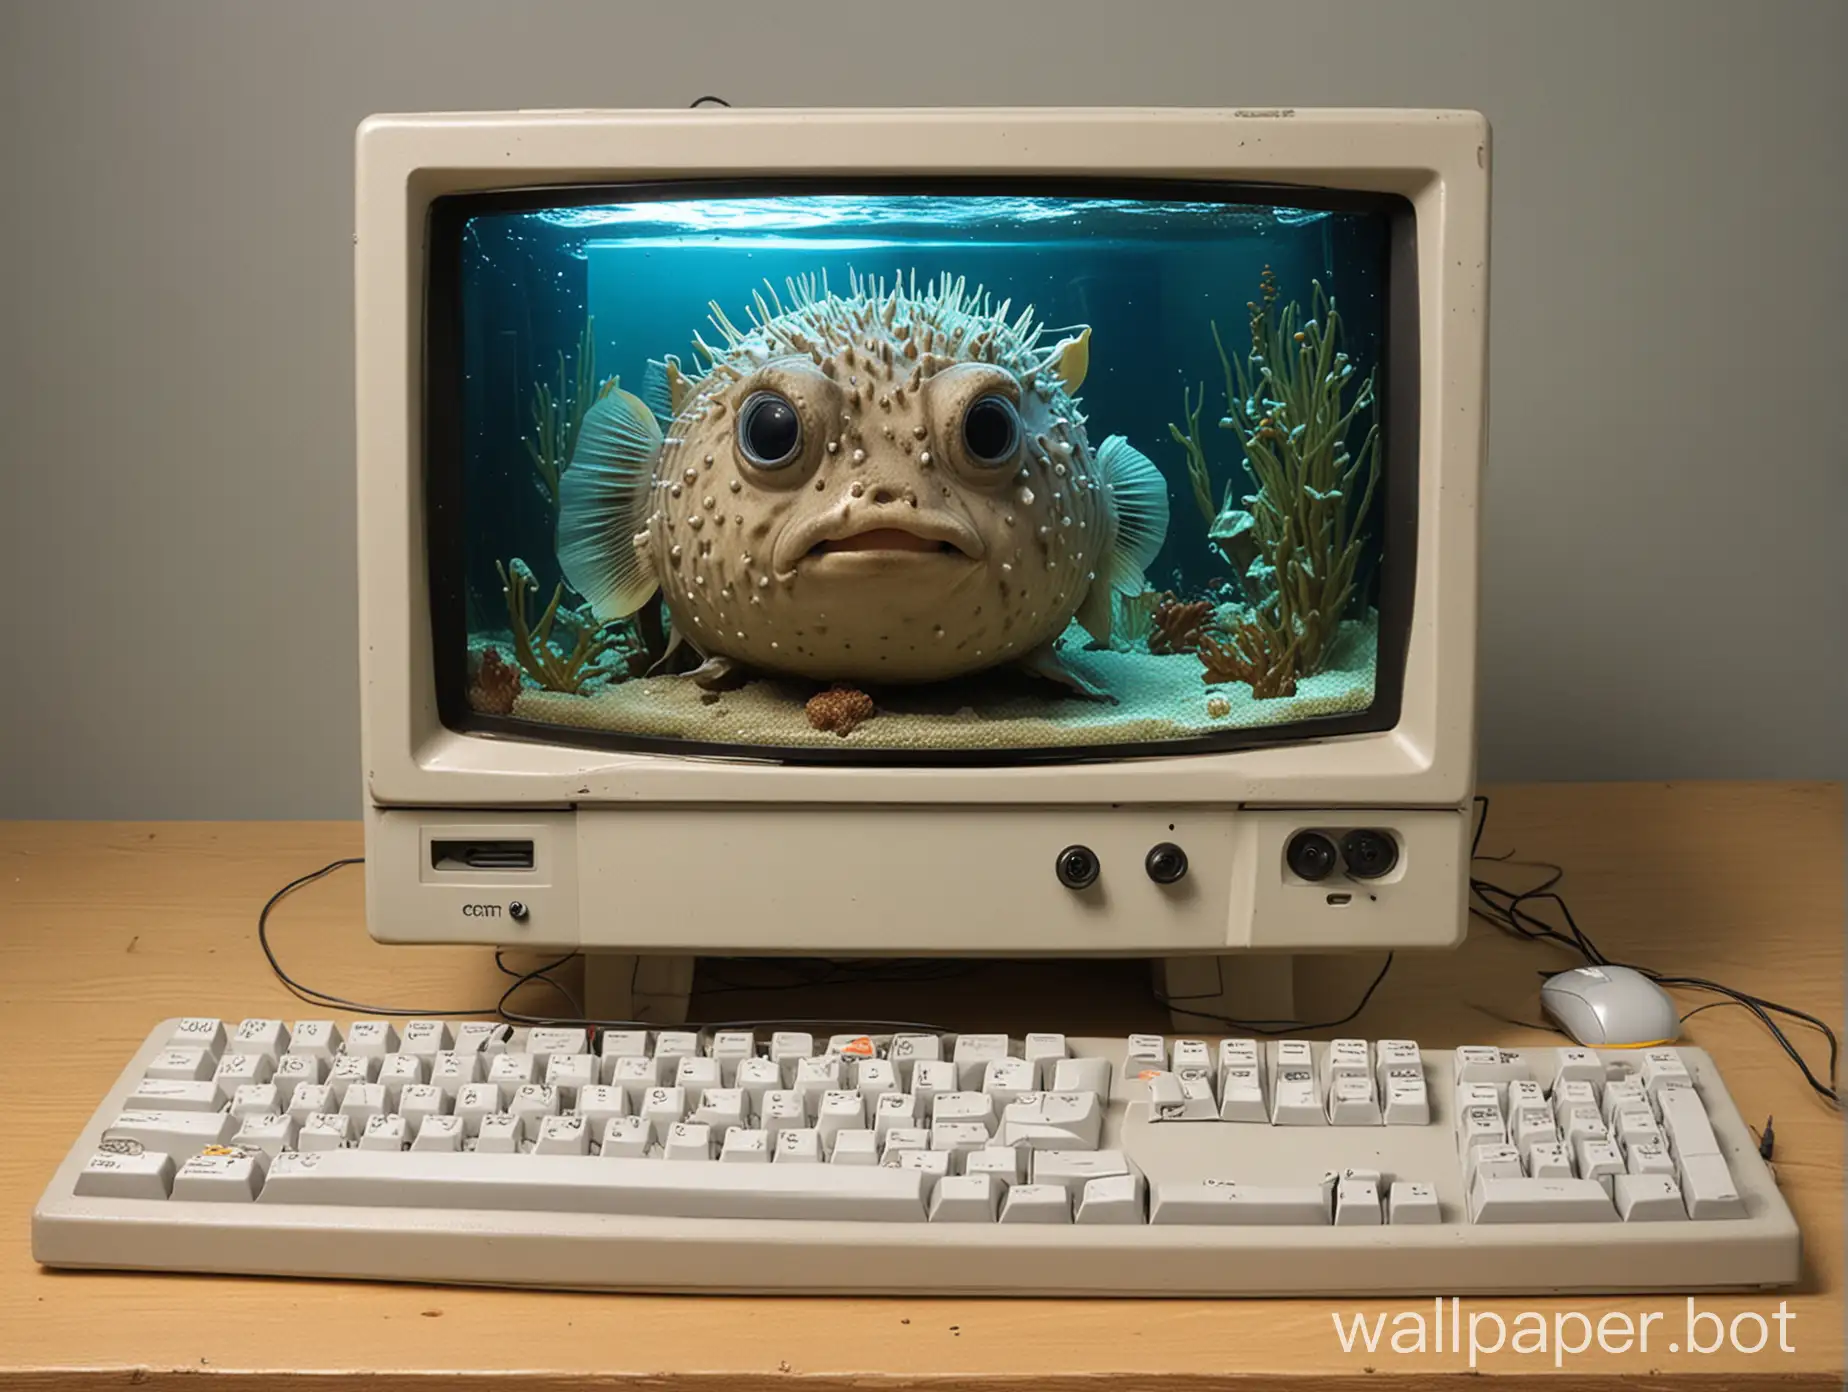 CRT monitor used as a fishbowl for a puffer fish is placed with keyboard and mouse